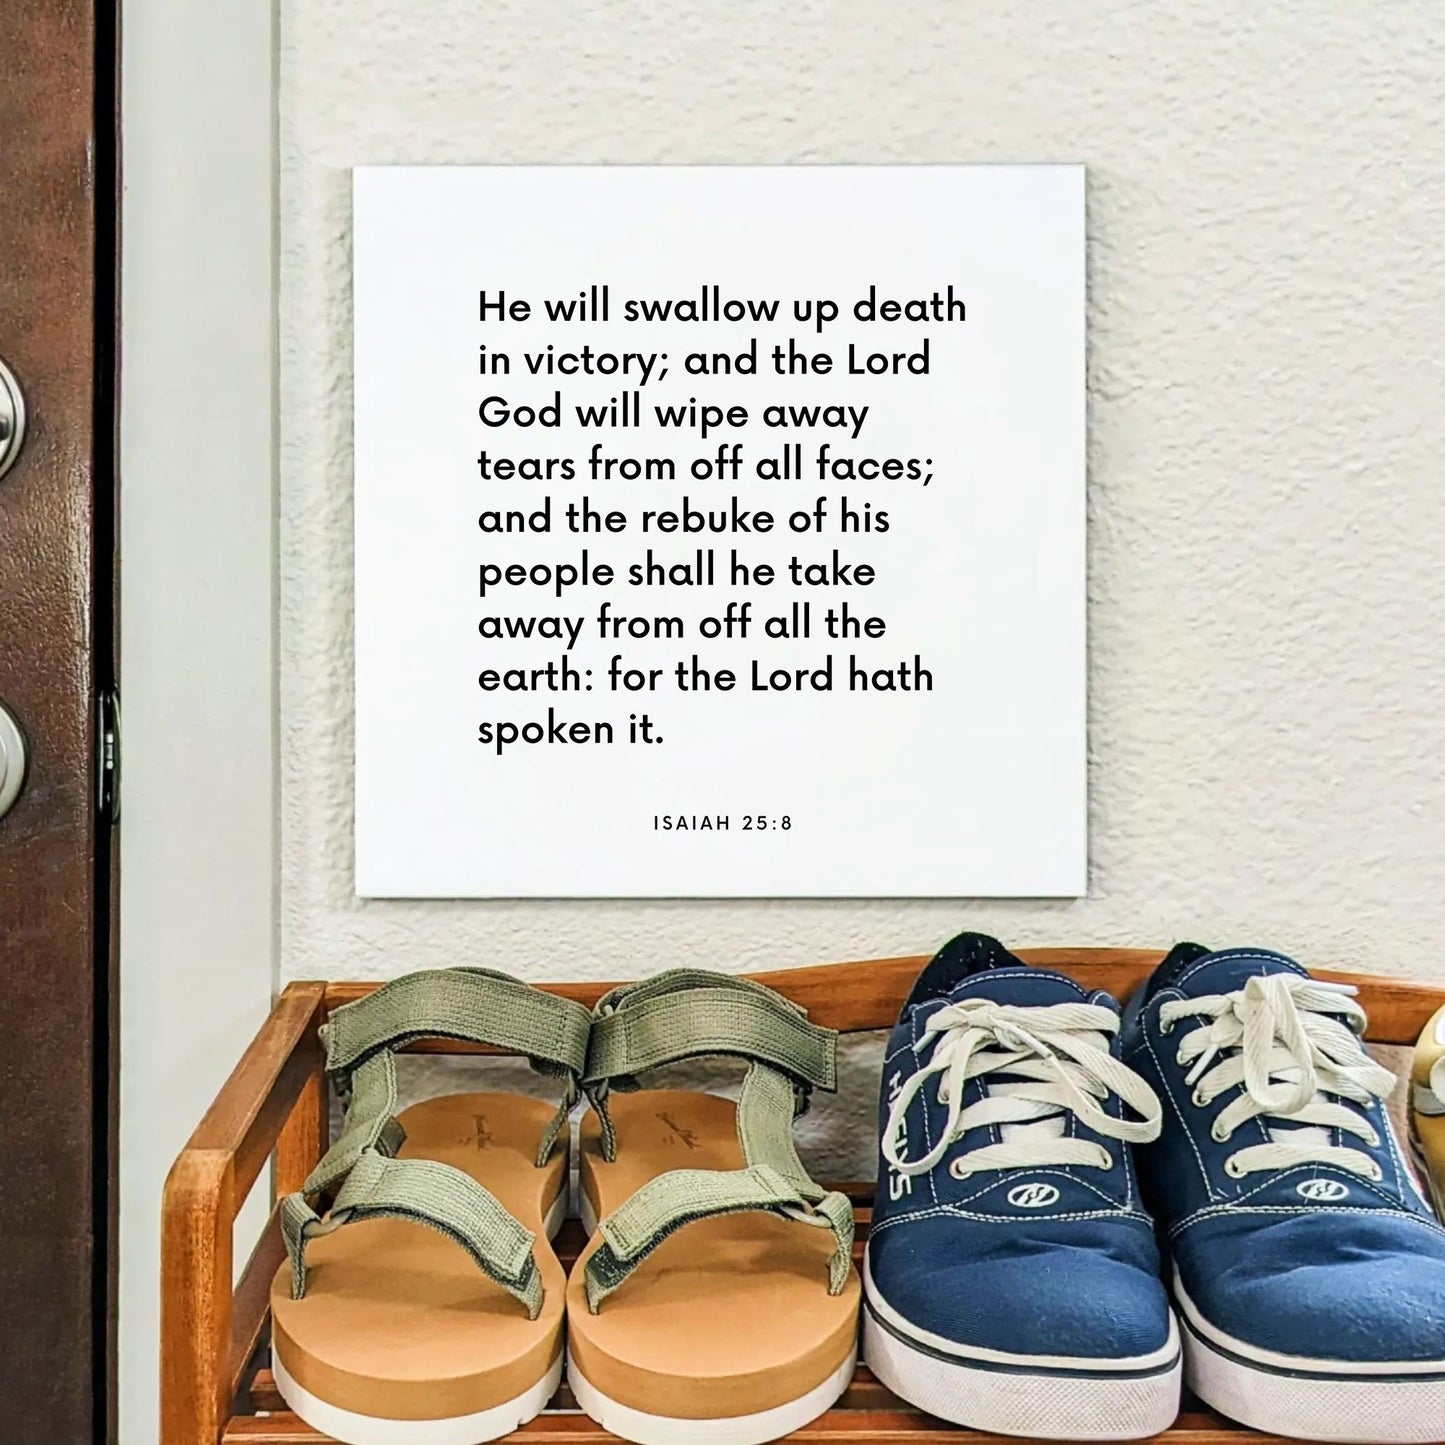 Shoes mouting of the scripture tile for Isaiah 25:8 - "God will wipe away tears from off all faces"